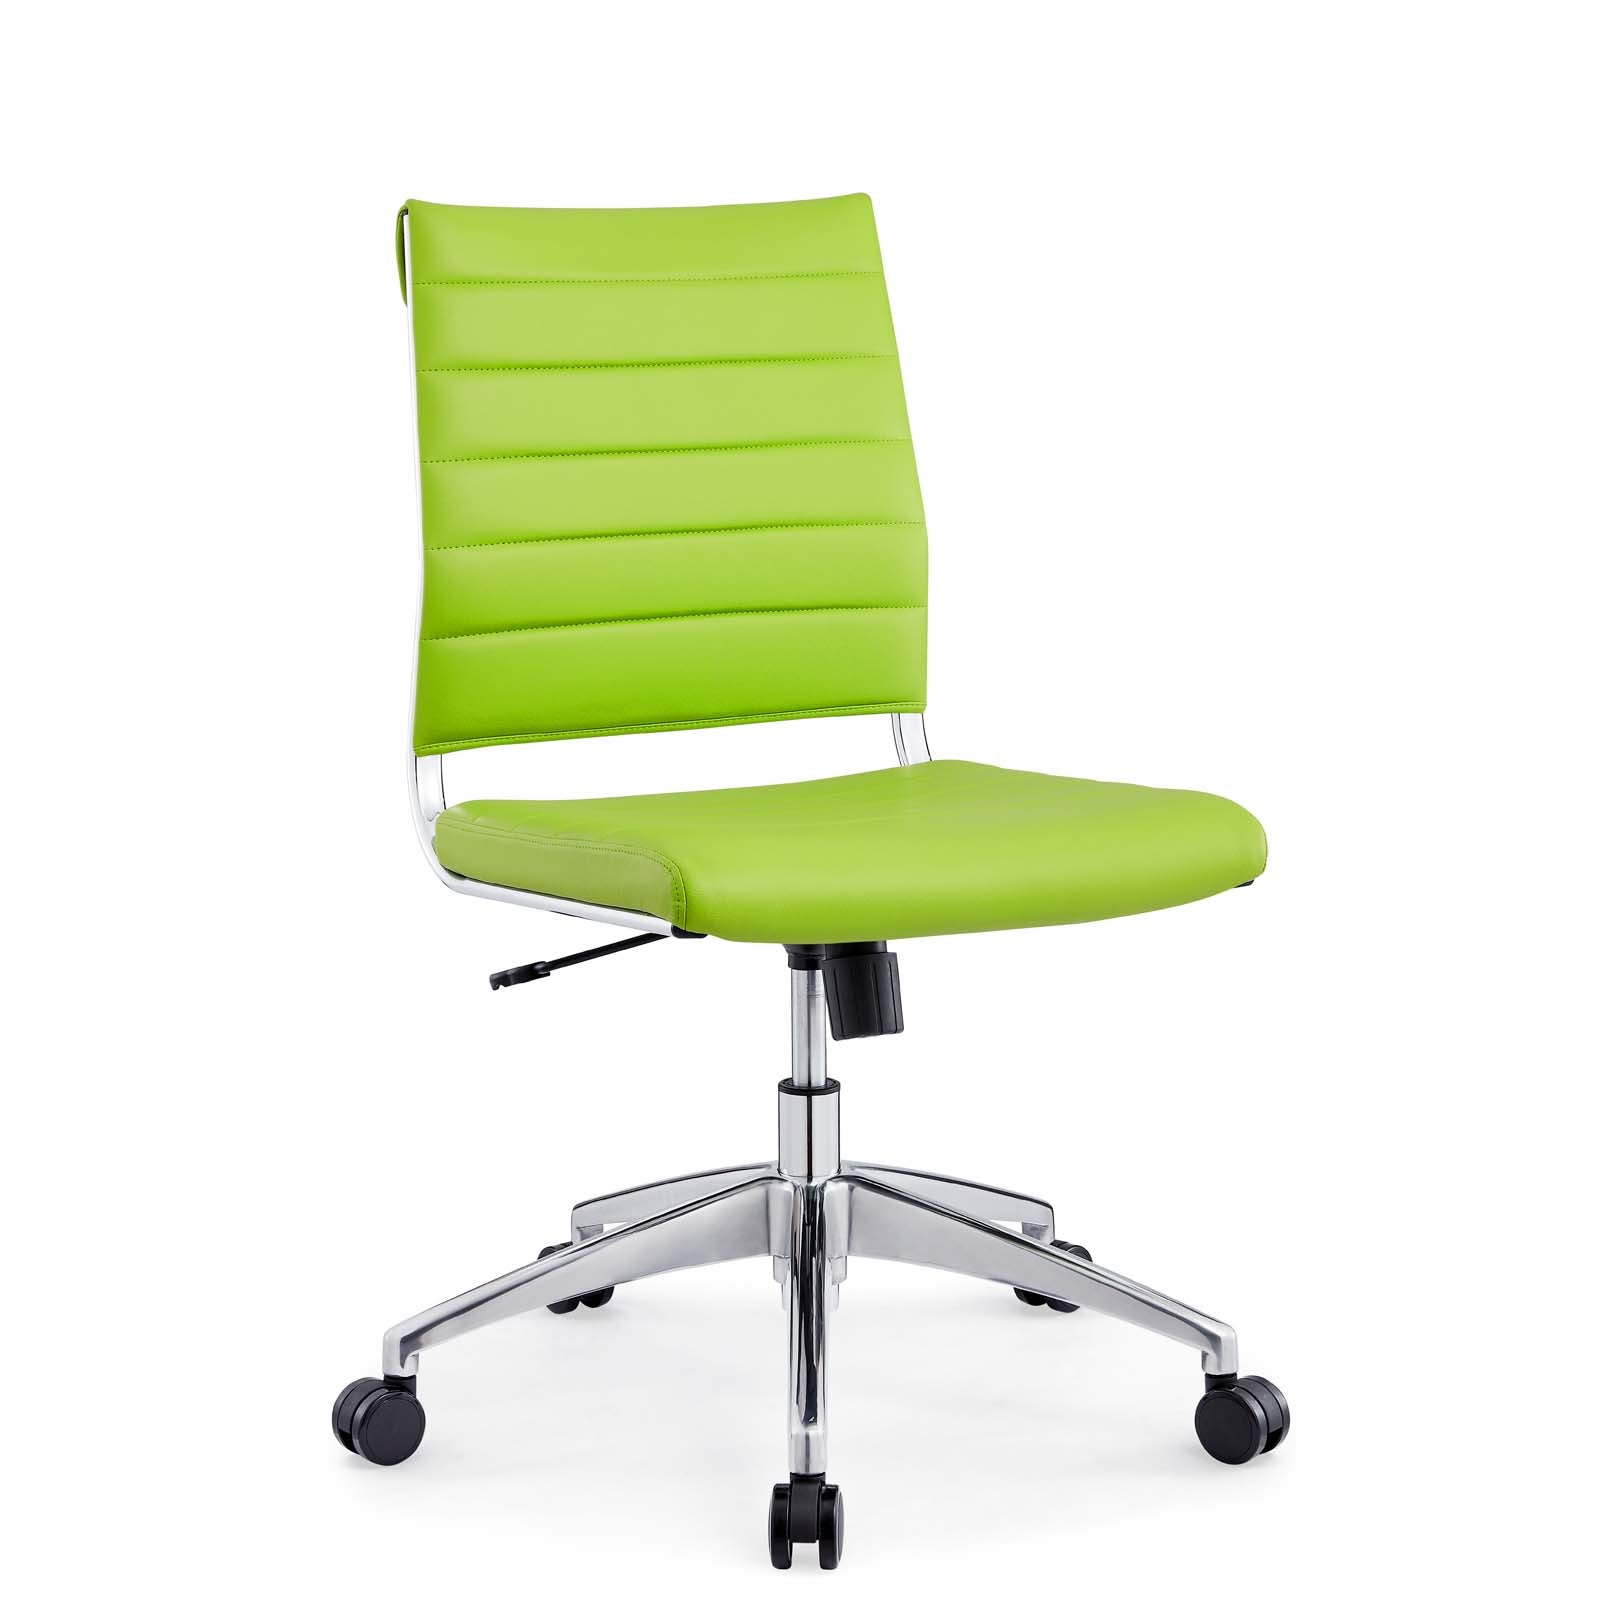 Jive Armless Mid Back Office Chair (Green) at BUILDMyplace